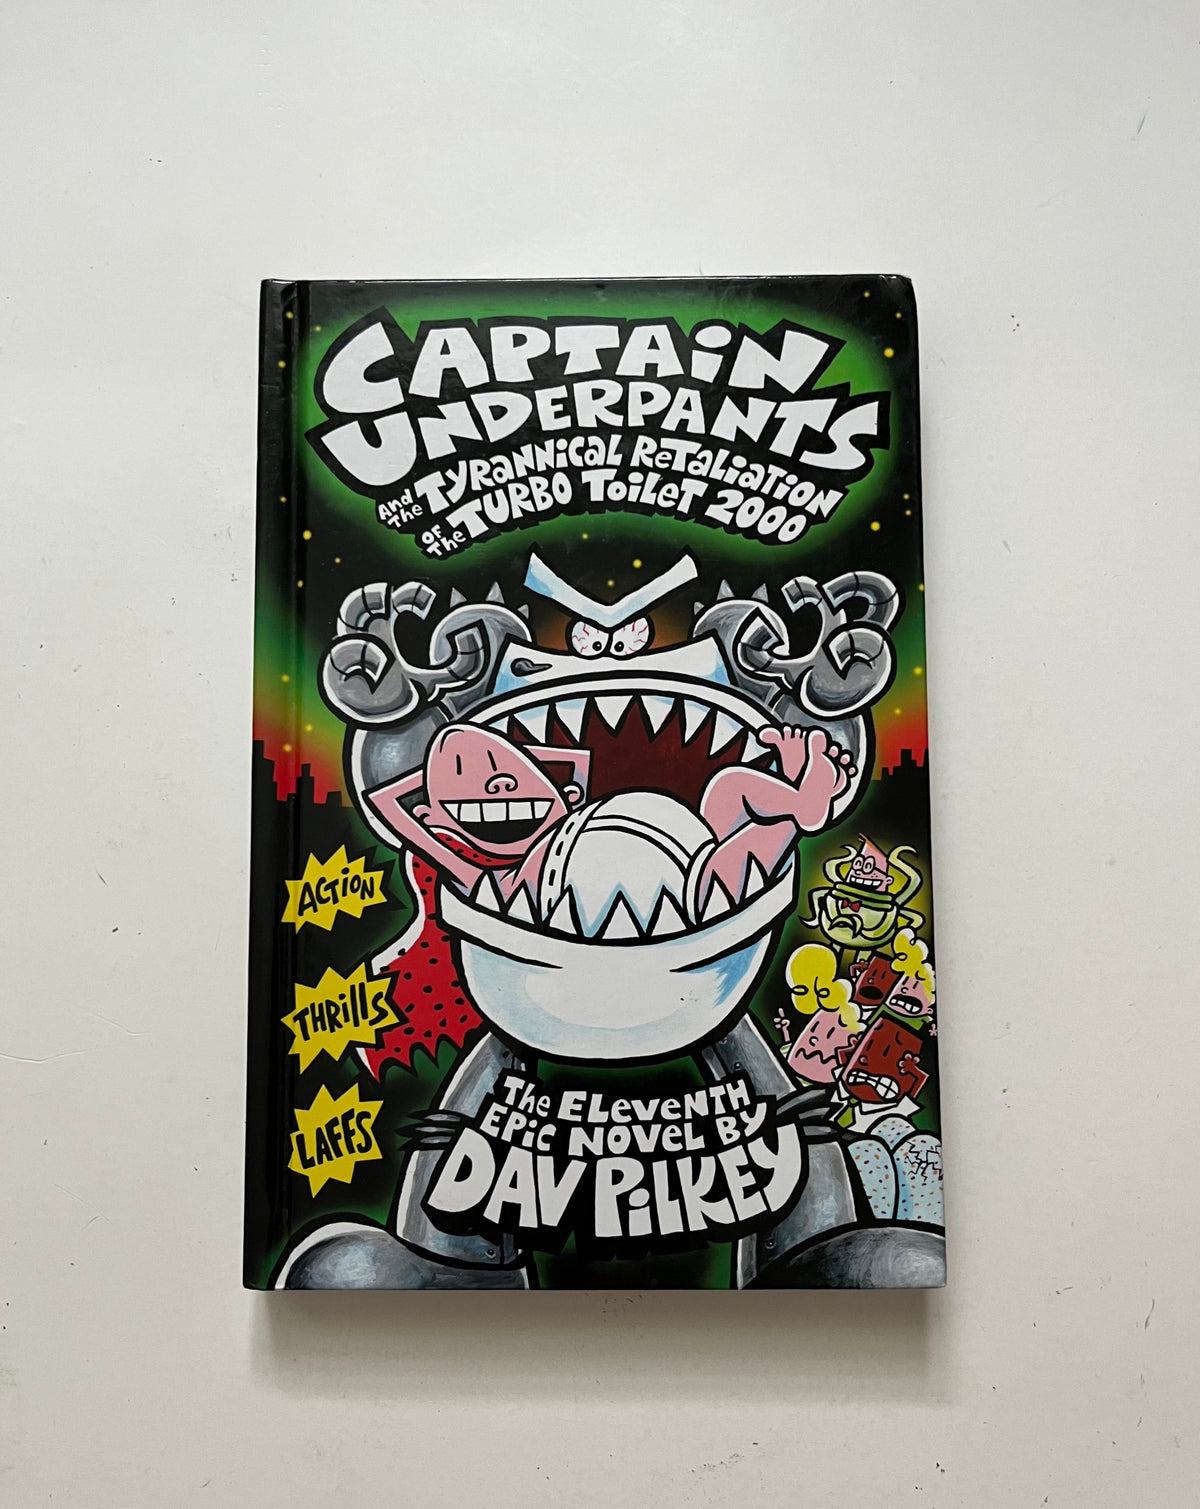 Captain Underpants: and The Tyrannical Retaliation of the Turbo Toilet 2000 by Dav Pilkey